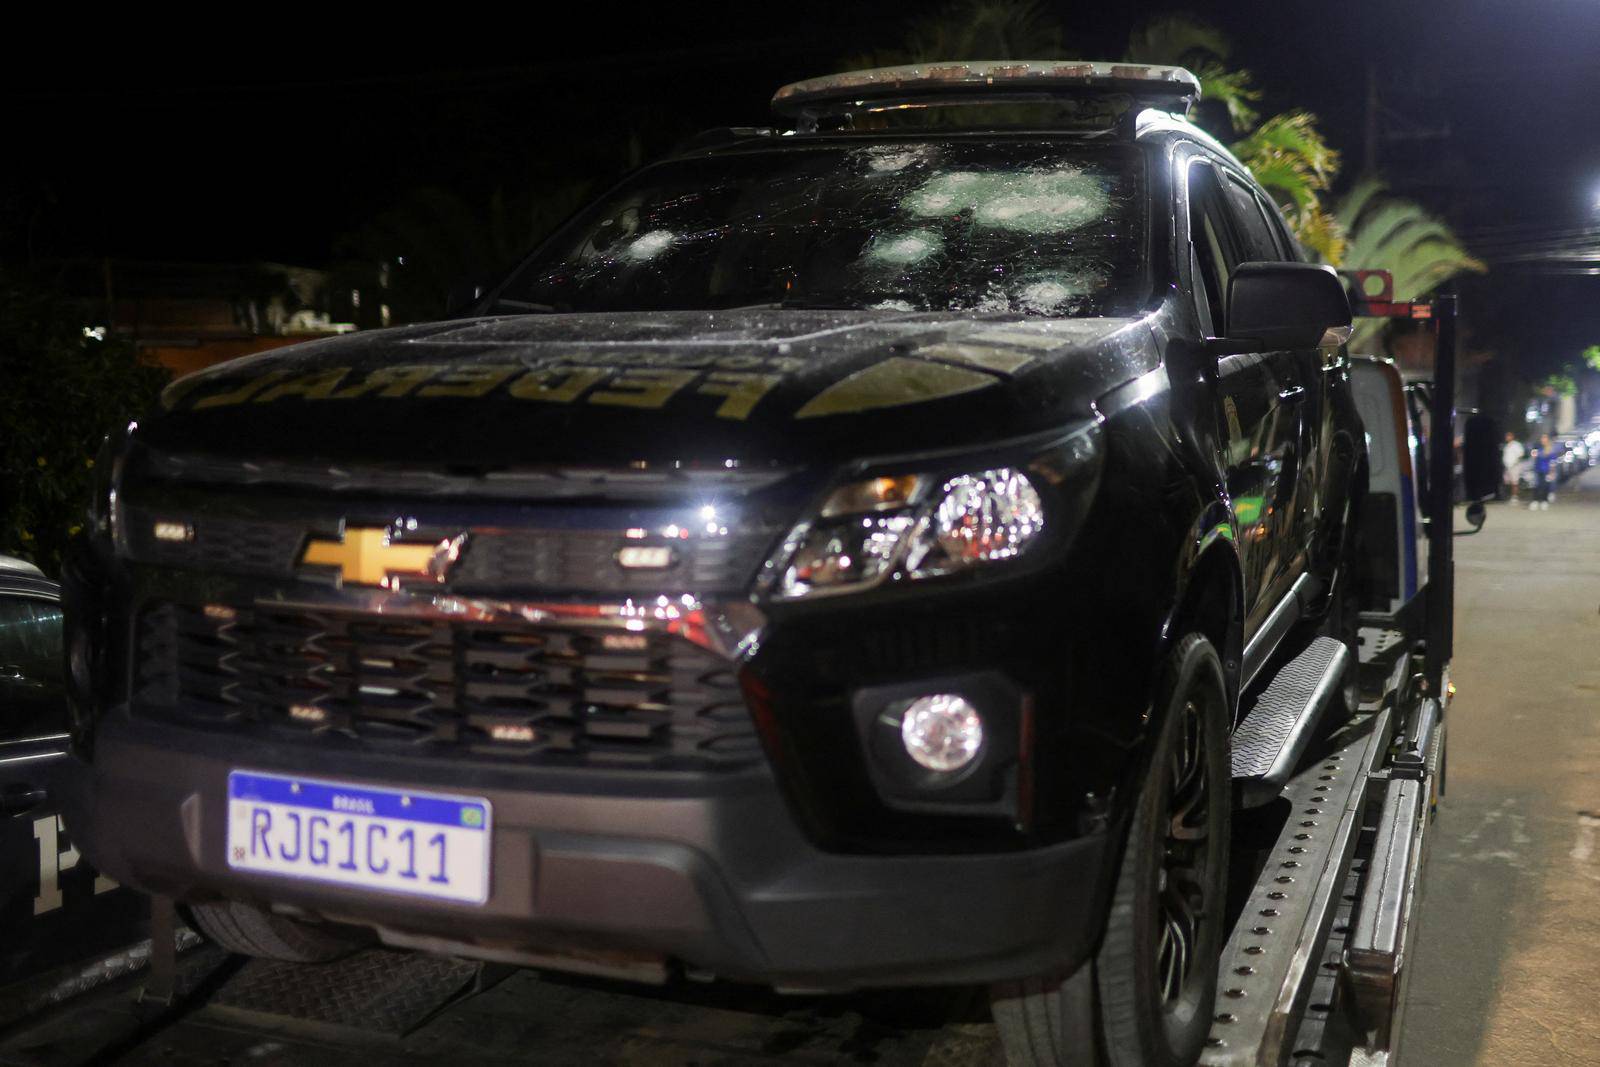 View of a federal police vehicle damaged after Brazilian politician Roberto Jefferson fired at police while resisting arrest in Comendador Levy Gasparian